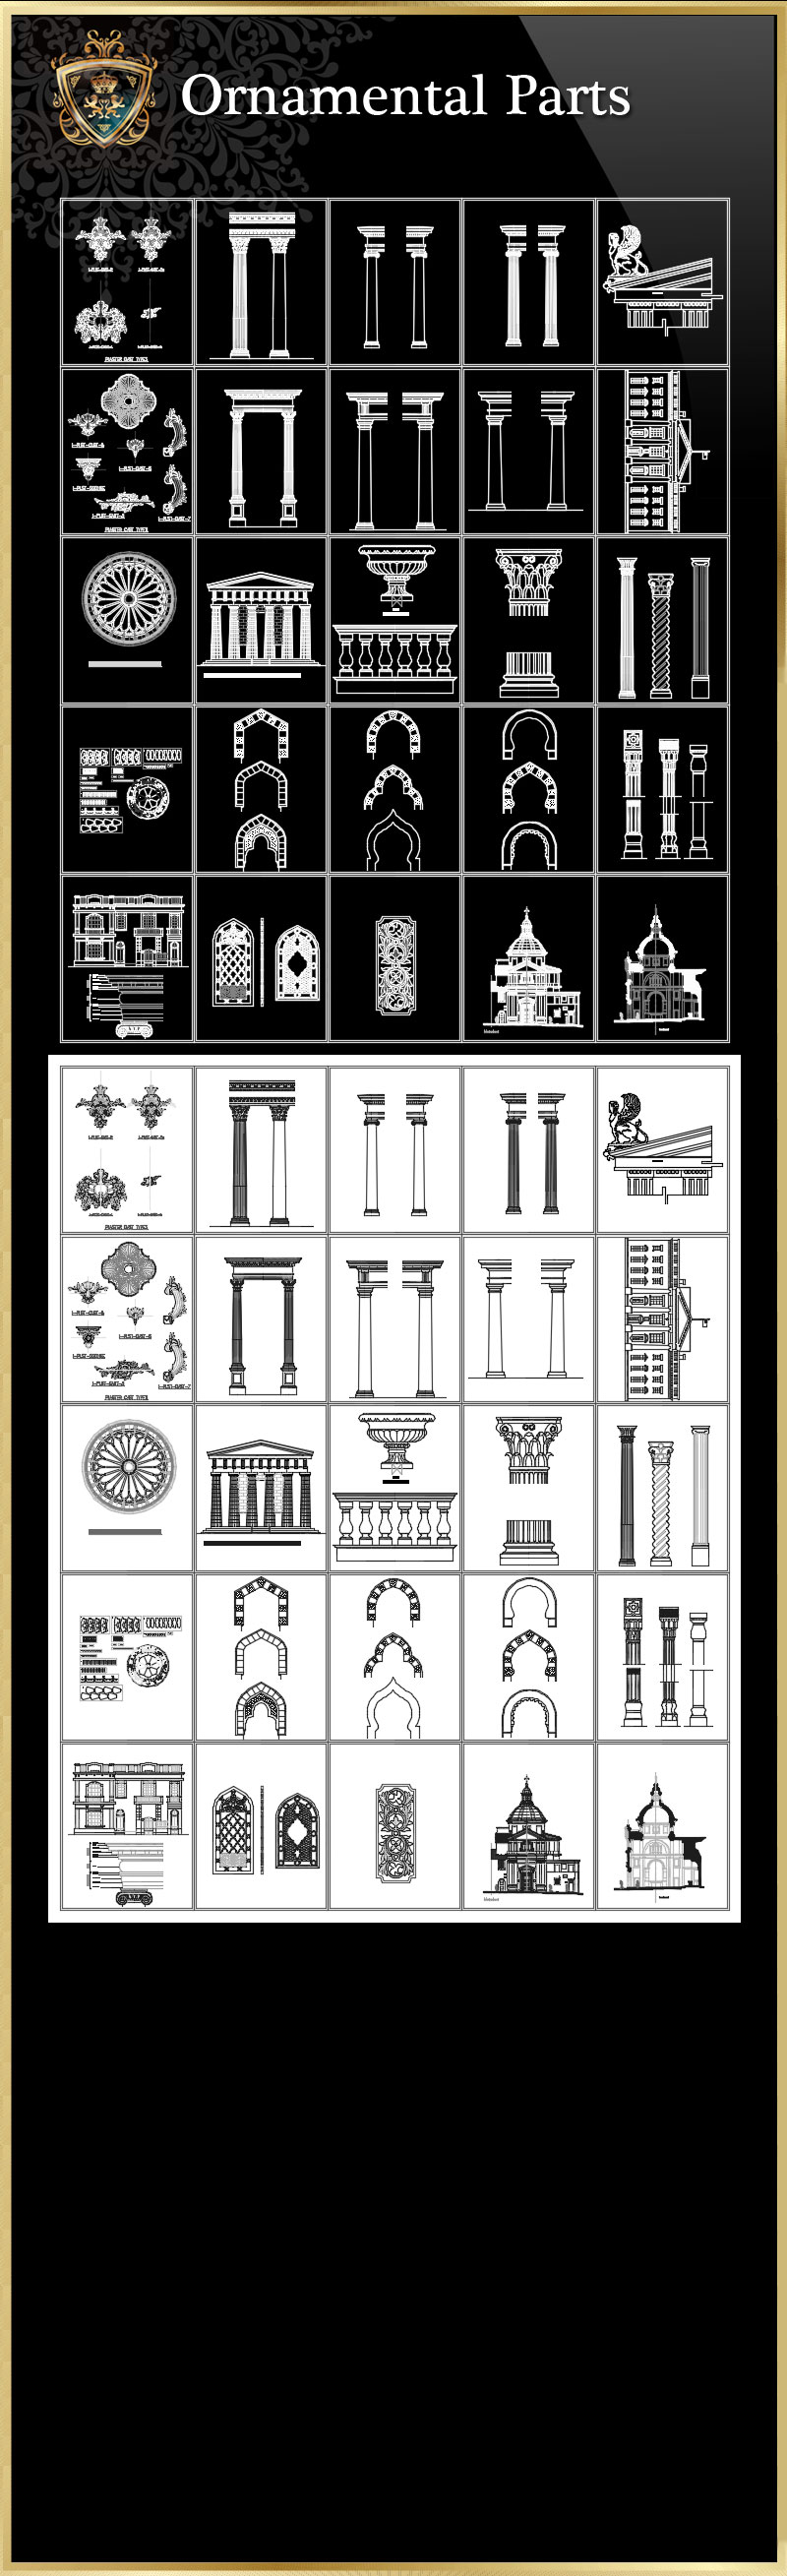 ★【Ornamental Parts of Buildings 2】Download Luxury Architectural Design CAD Drawings--Over 20000+ High quality CAD Blocks and Drawings Download!